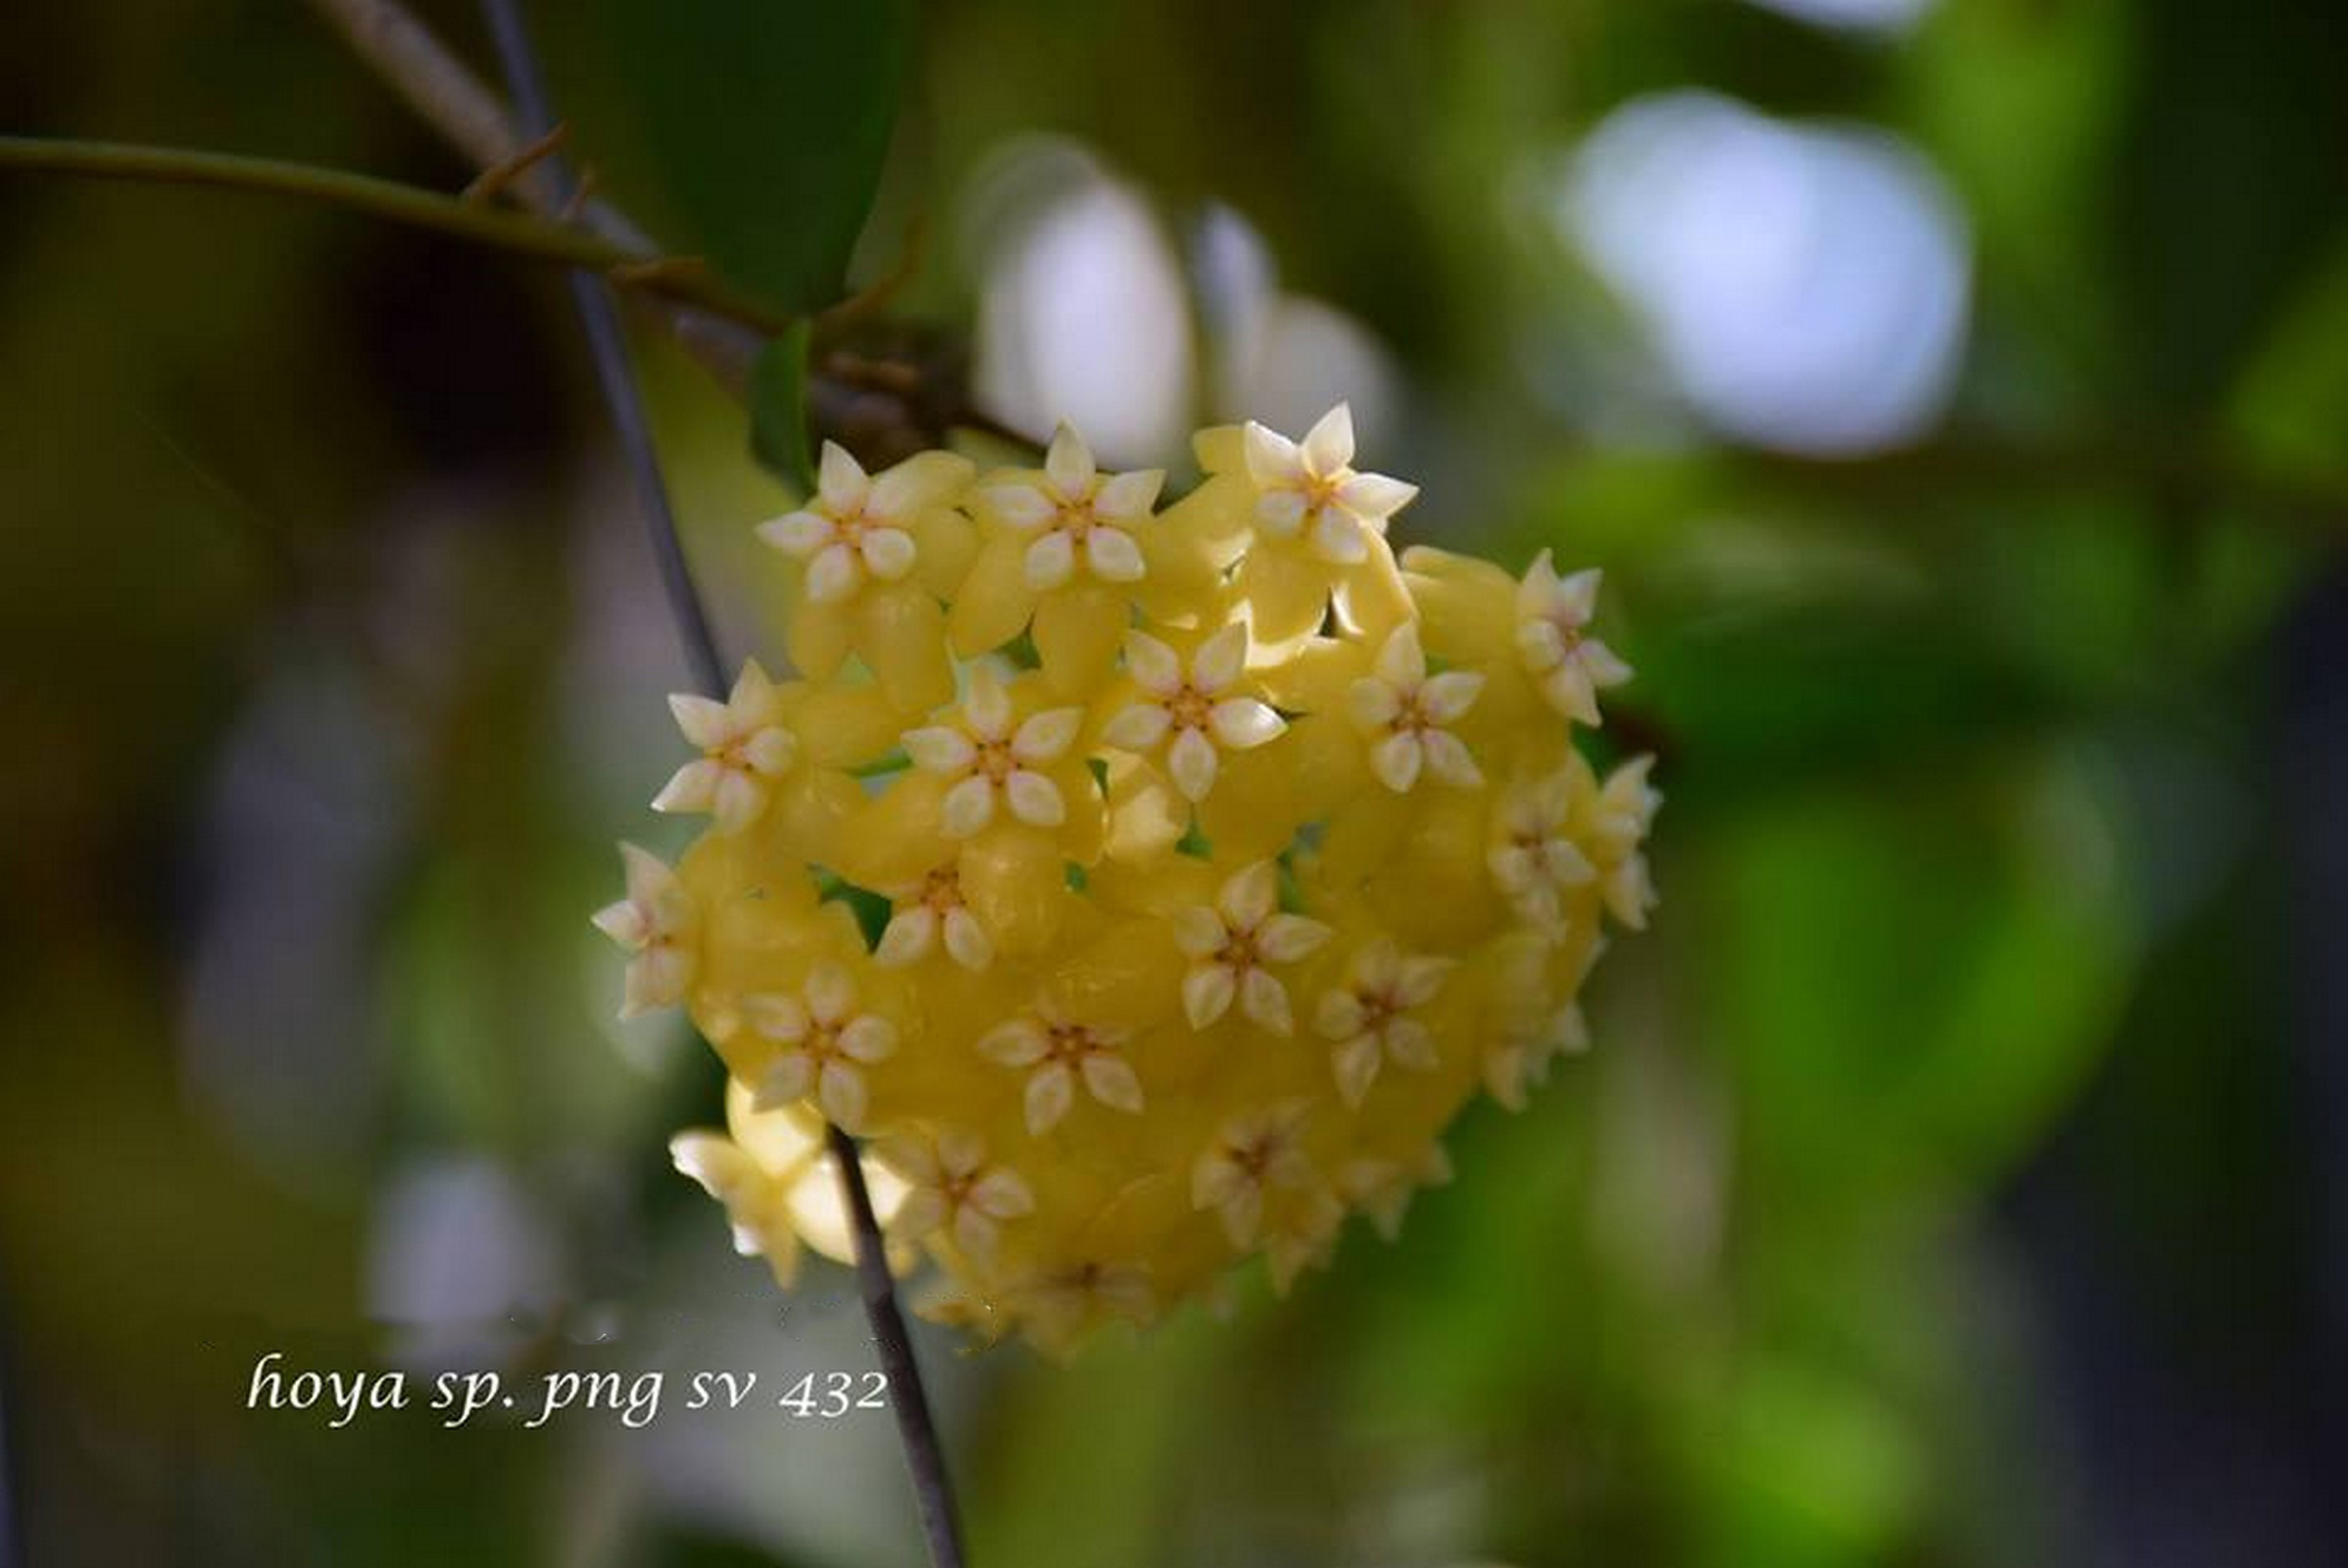 Hoya Sp PNG SV 432 - Amazing Price from Thailand, Buy Now